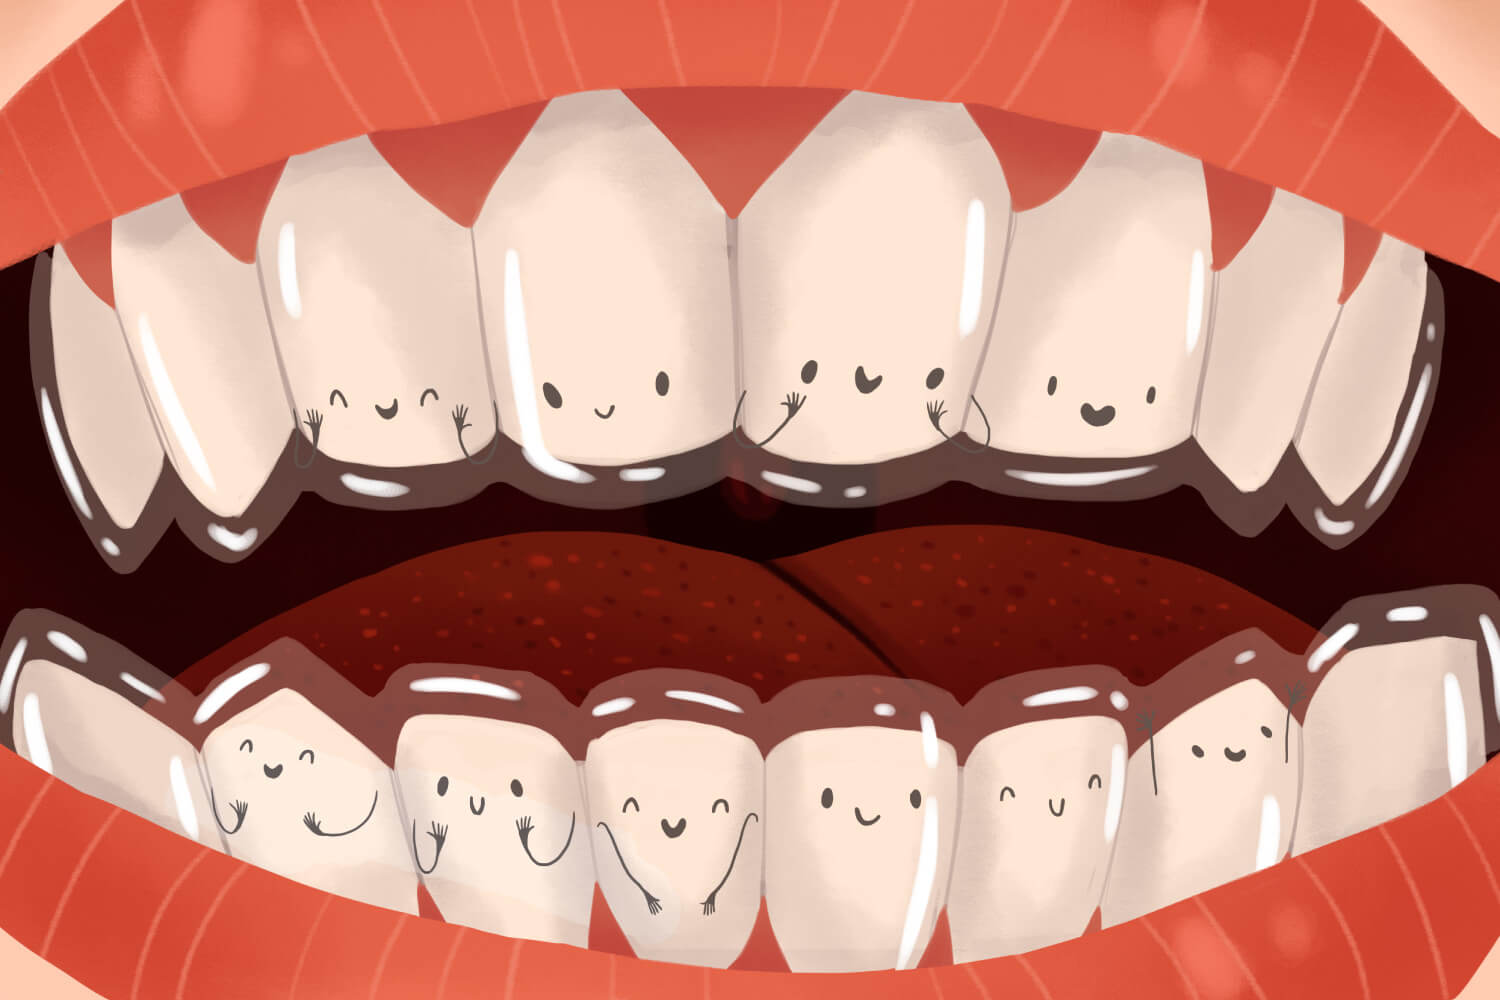 Cartoon image of Invisalign clear aligners to straighten teeth